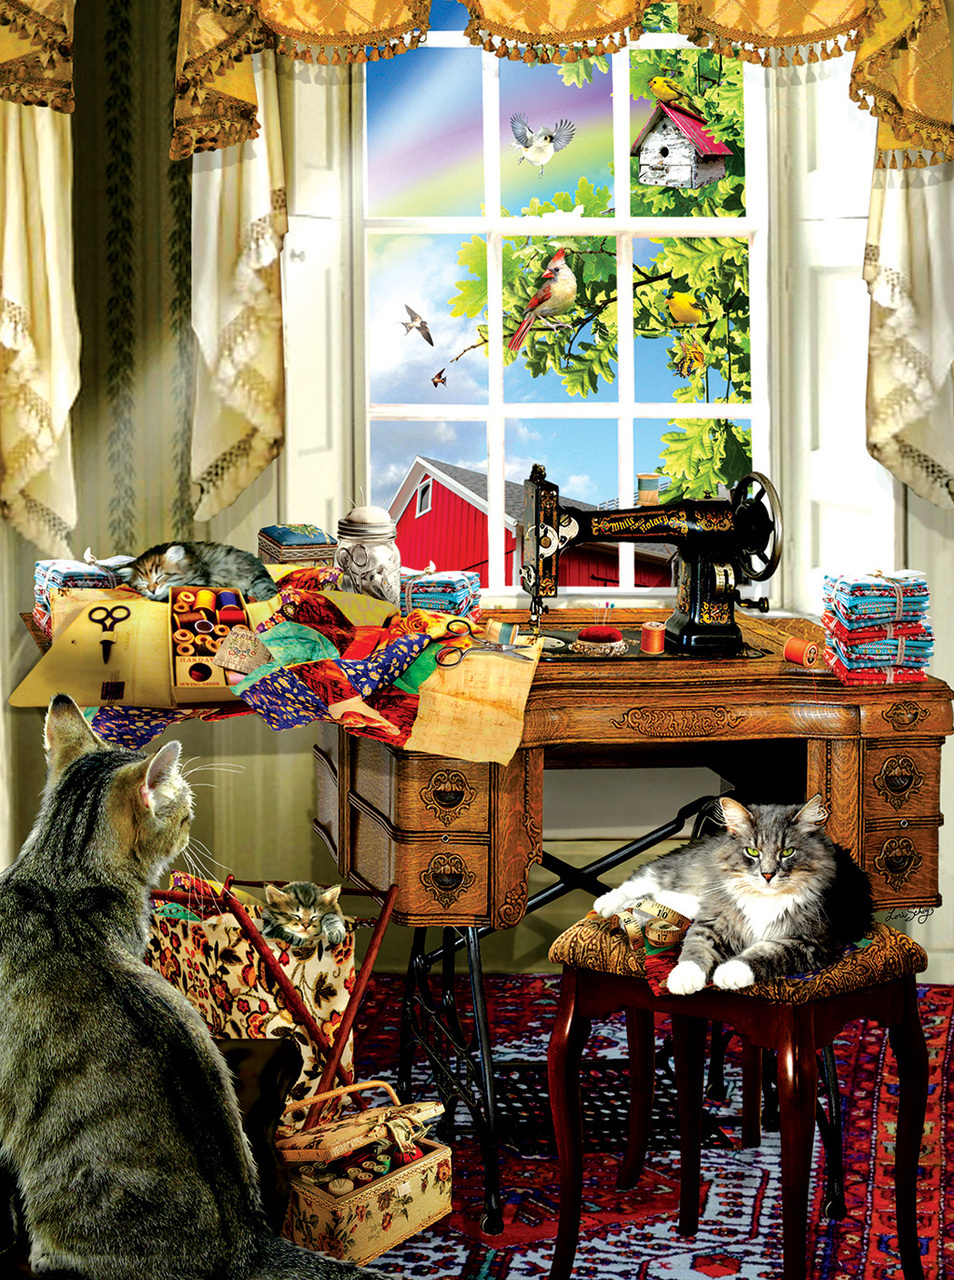 SunsOut Puzzle - #34983 The Sewing Room - 1000pc Jigsaw Puzzle